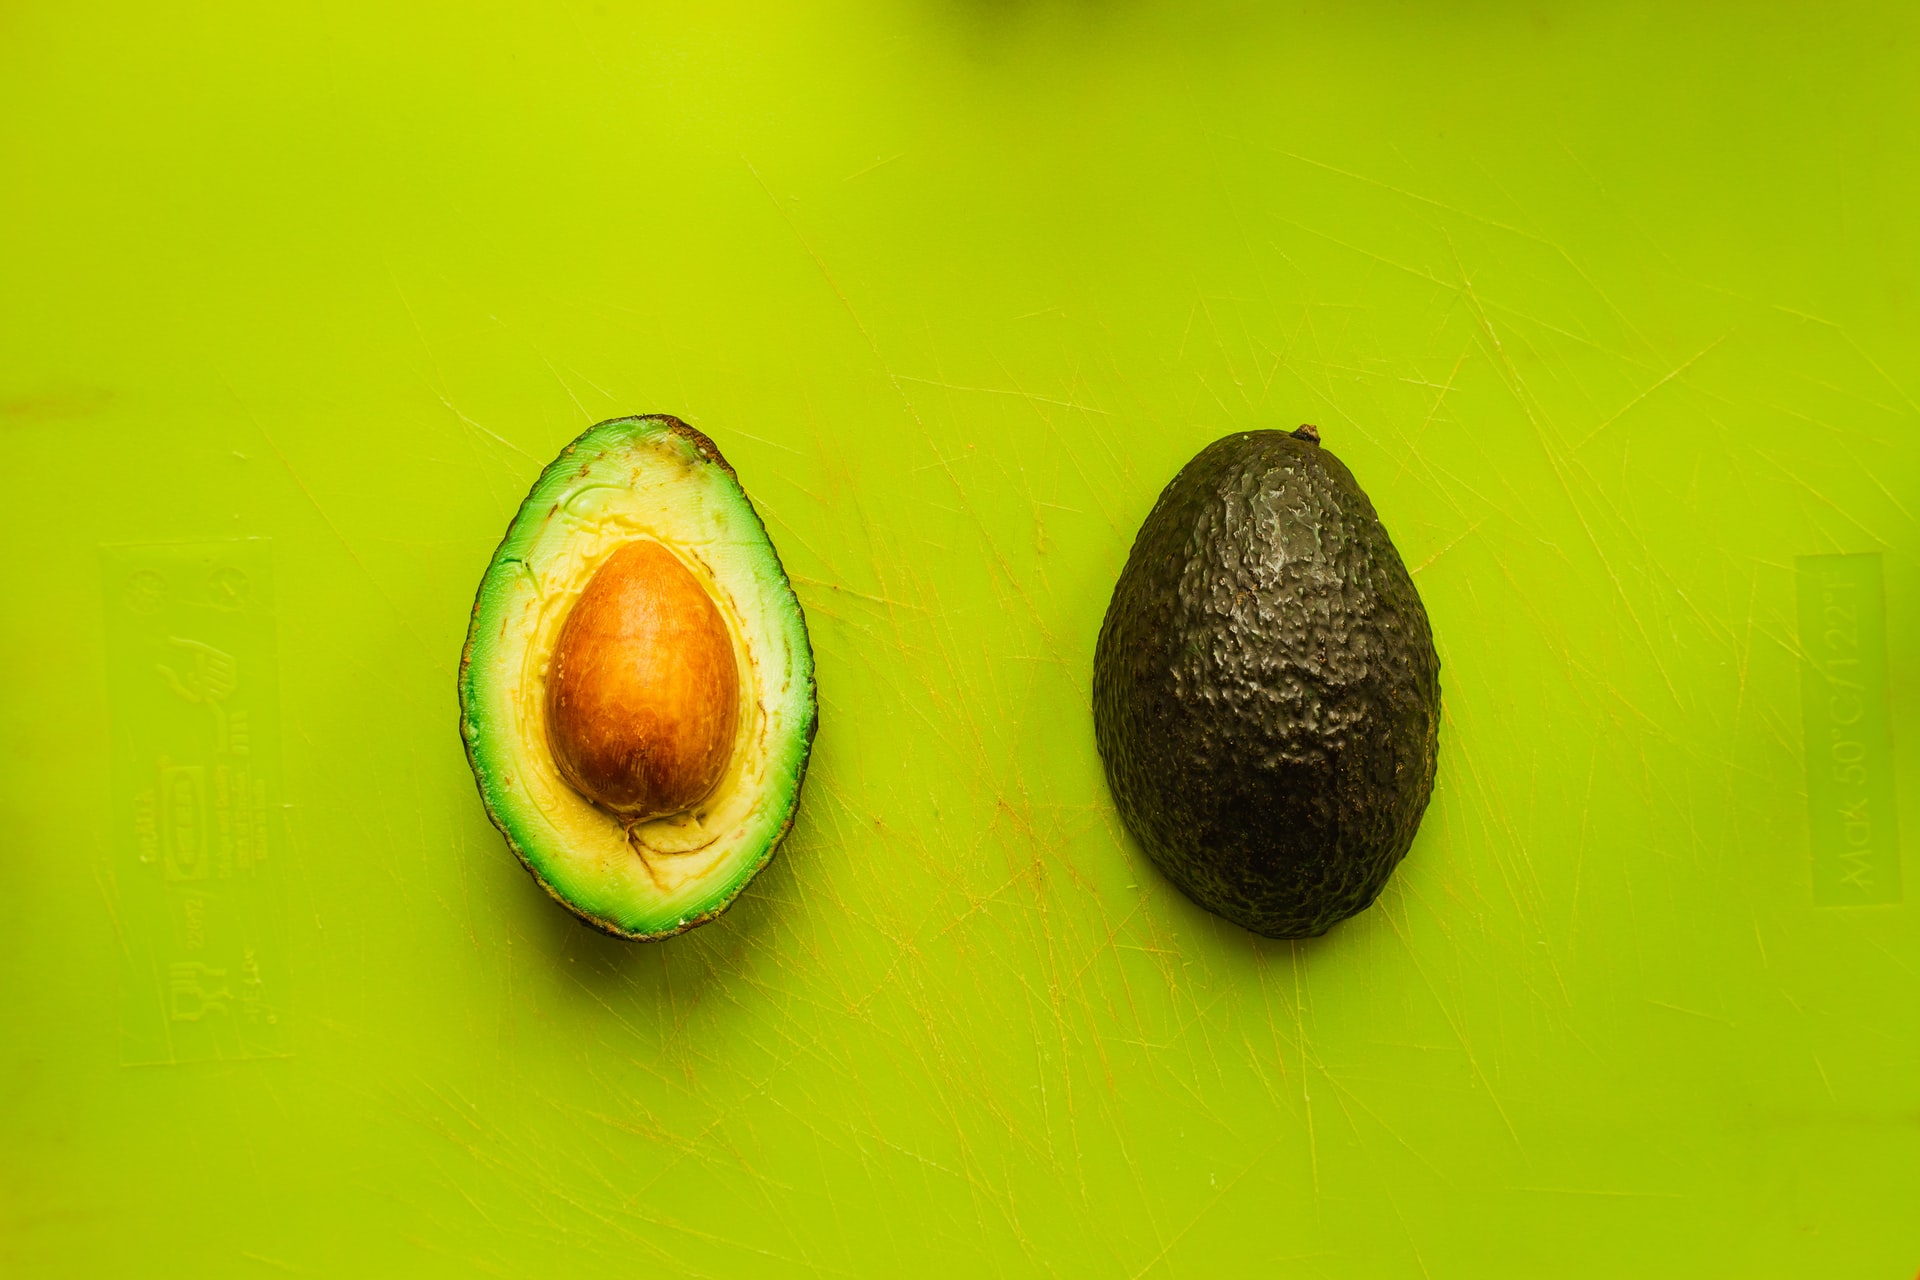 How to Plant Your First Avocado During Quarantine 6